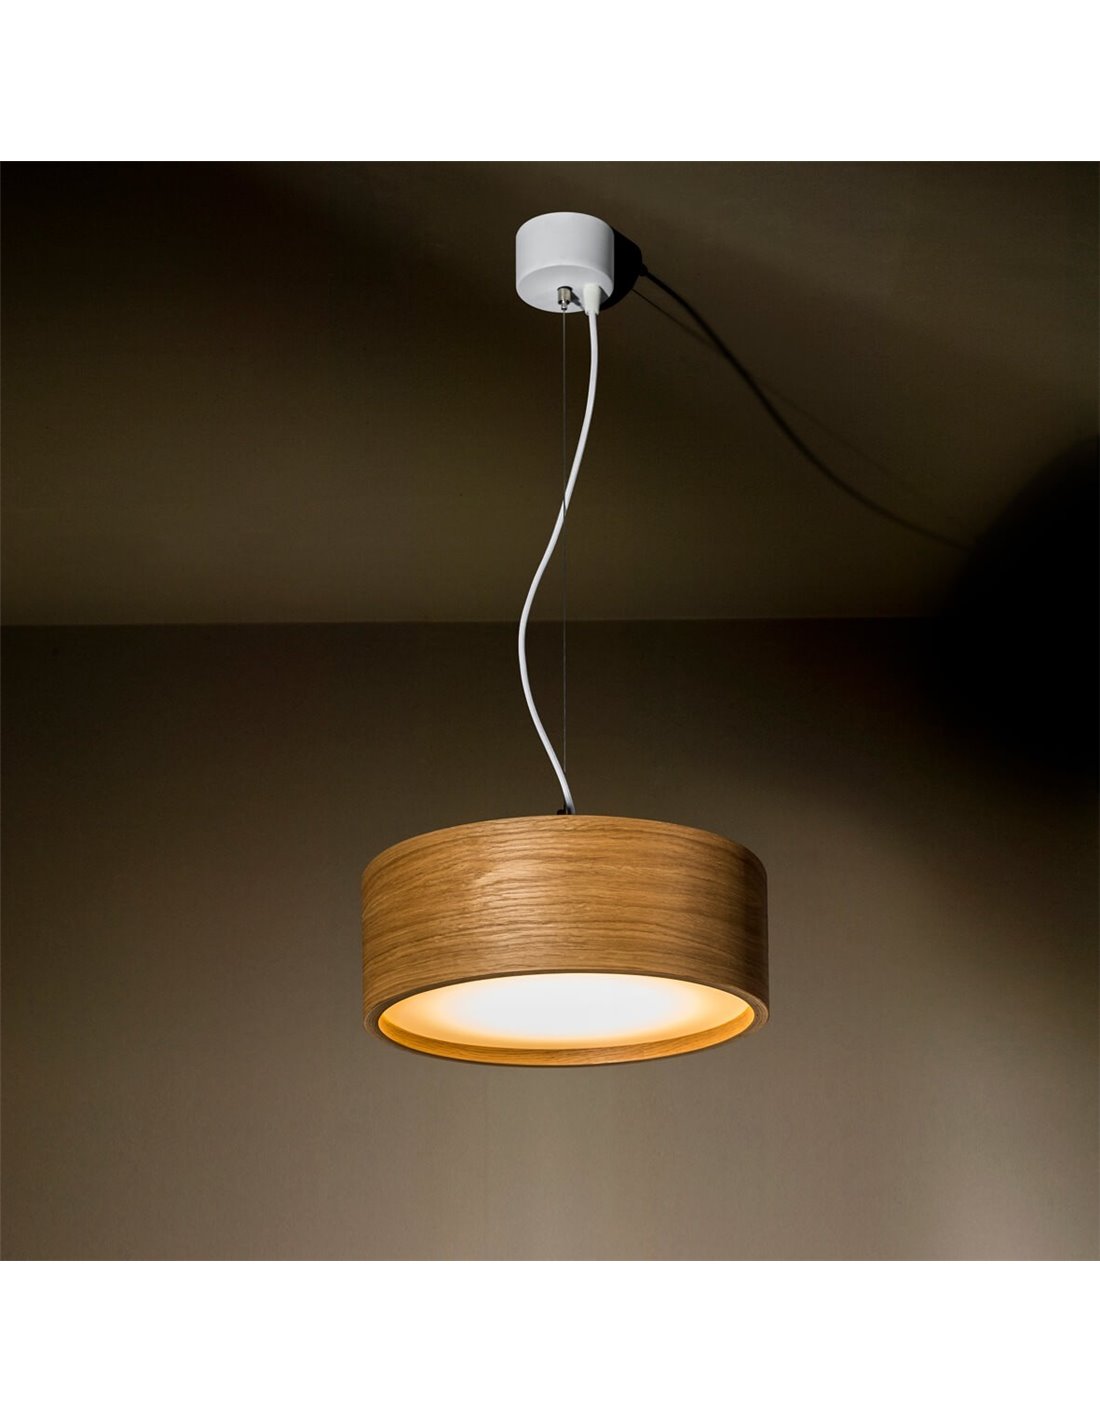 TAL FABIAN Suspended DIMMABLE lamp online with support.